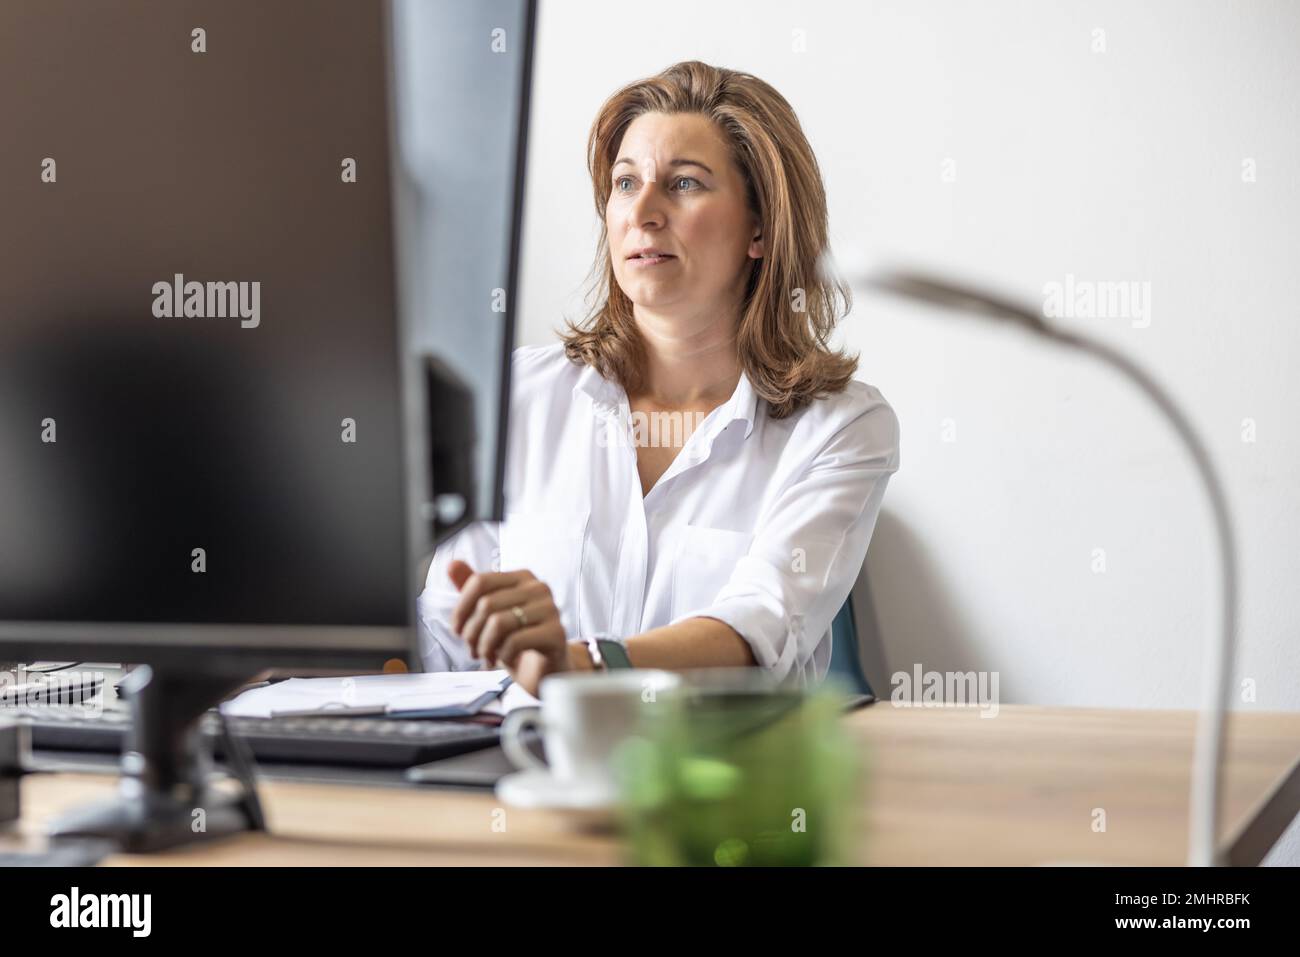 An accountant or businesswoman works in her office at a computer. Stock Photo